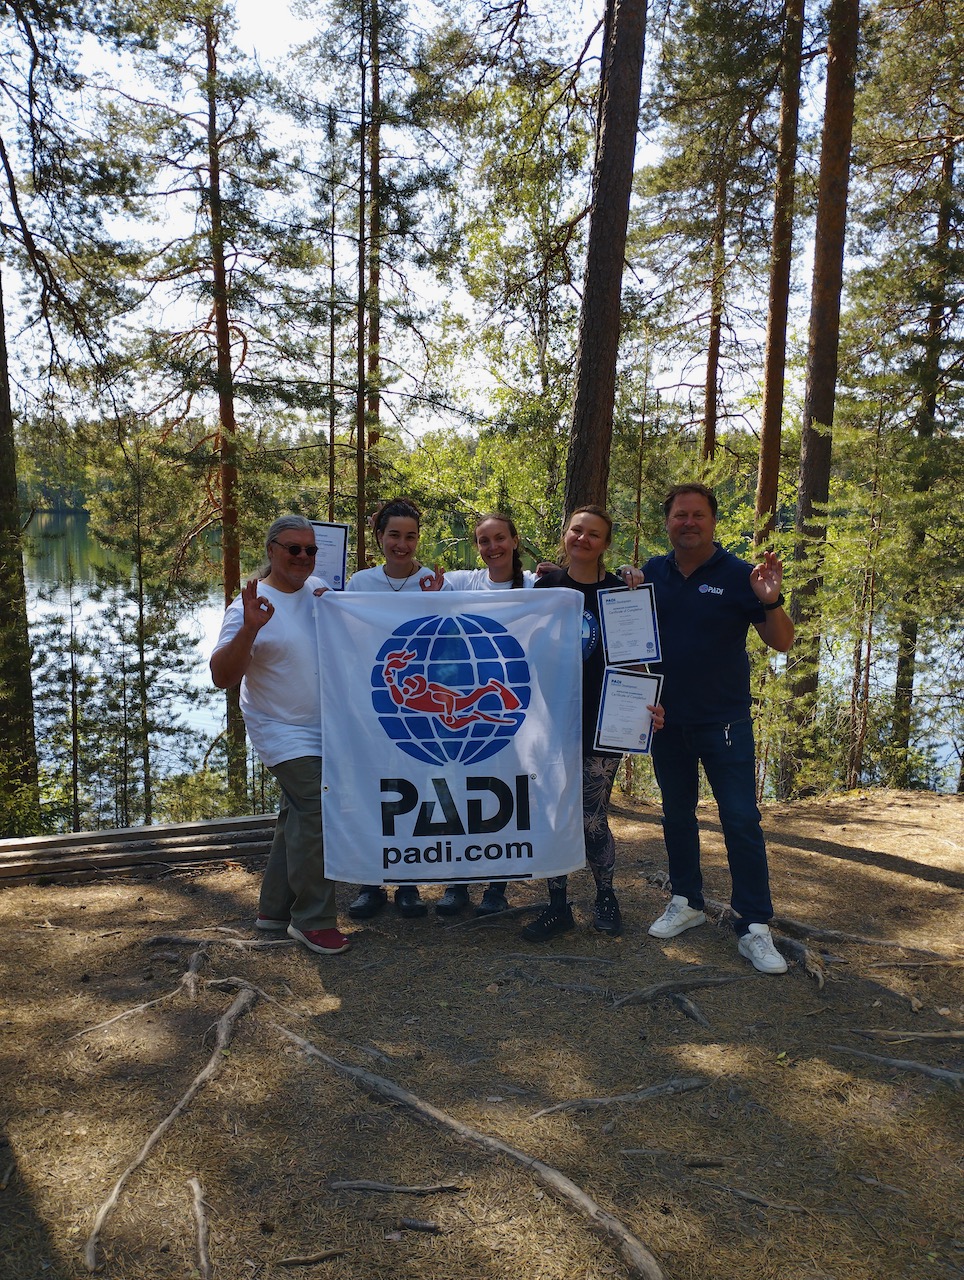 A group of PADI divers hold up the PADI flag in a forest in Finland